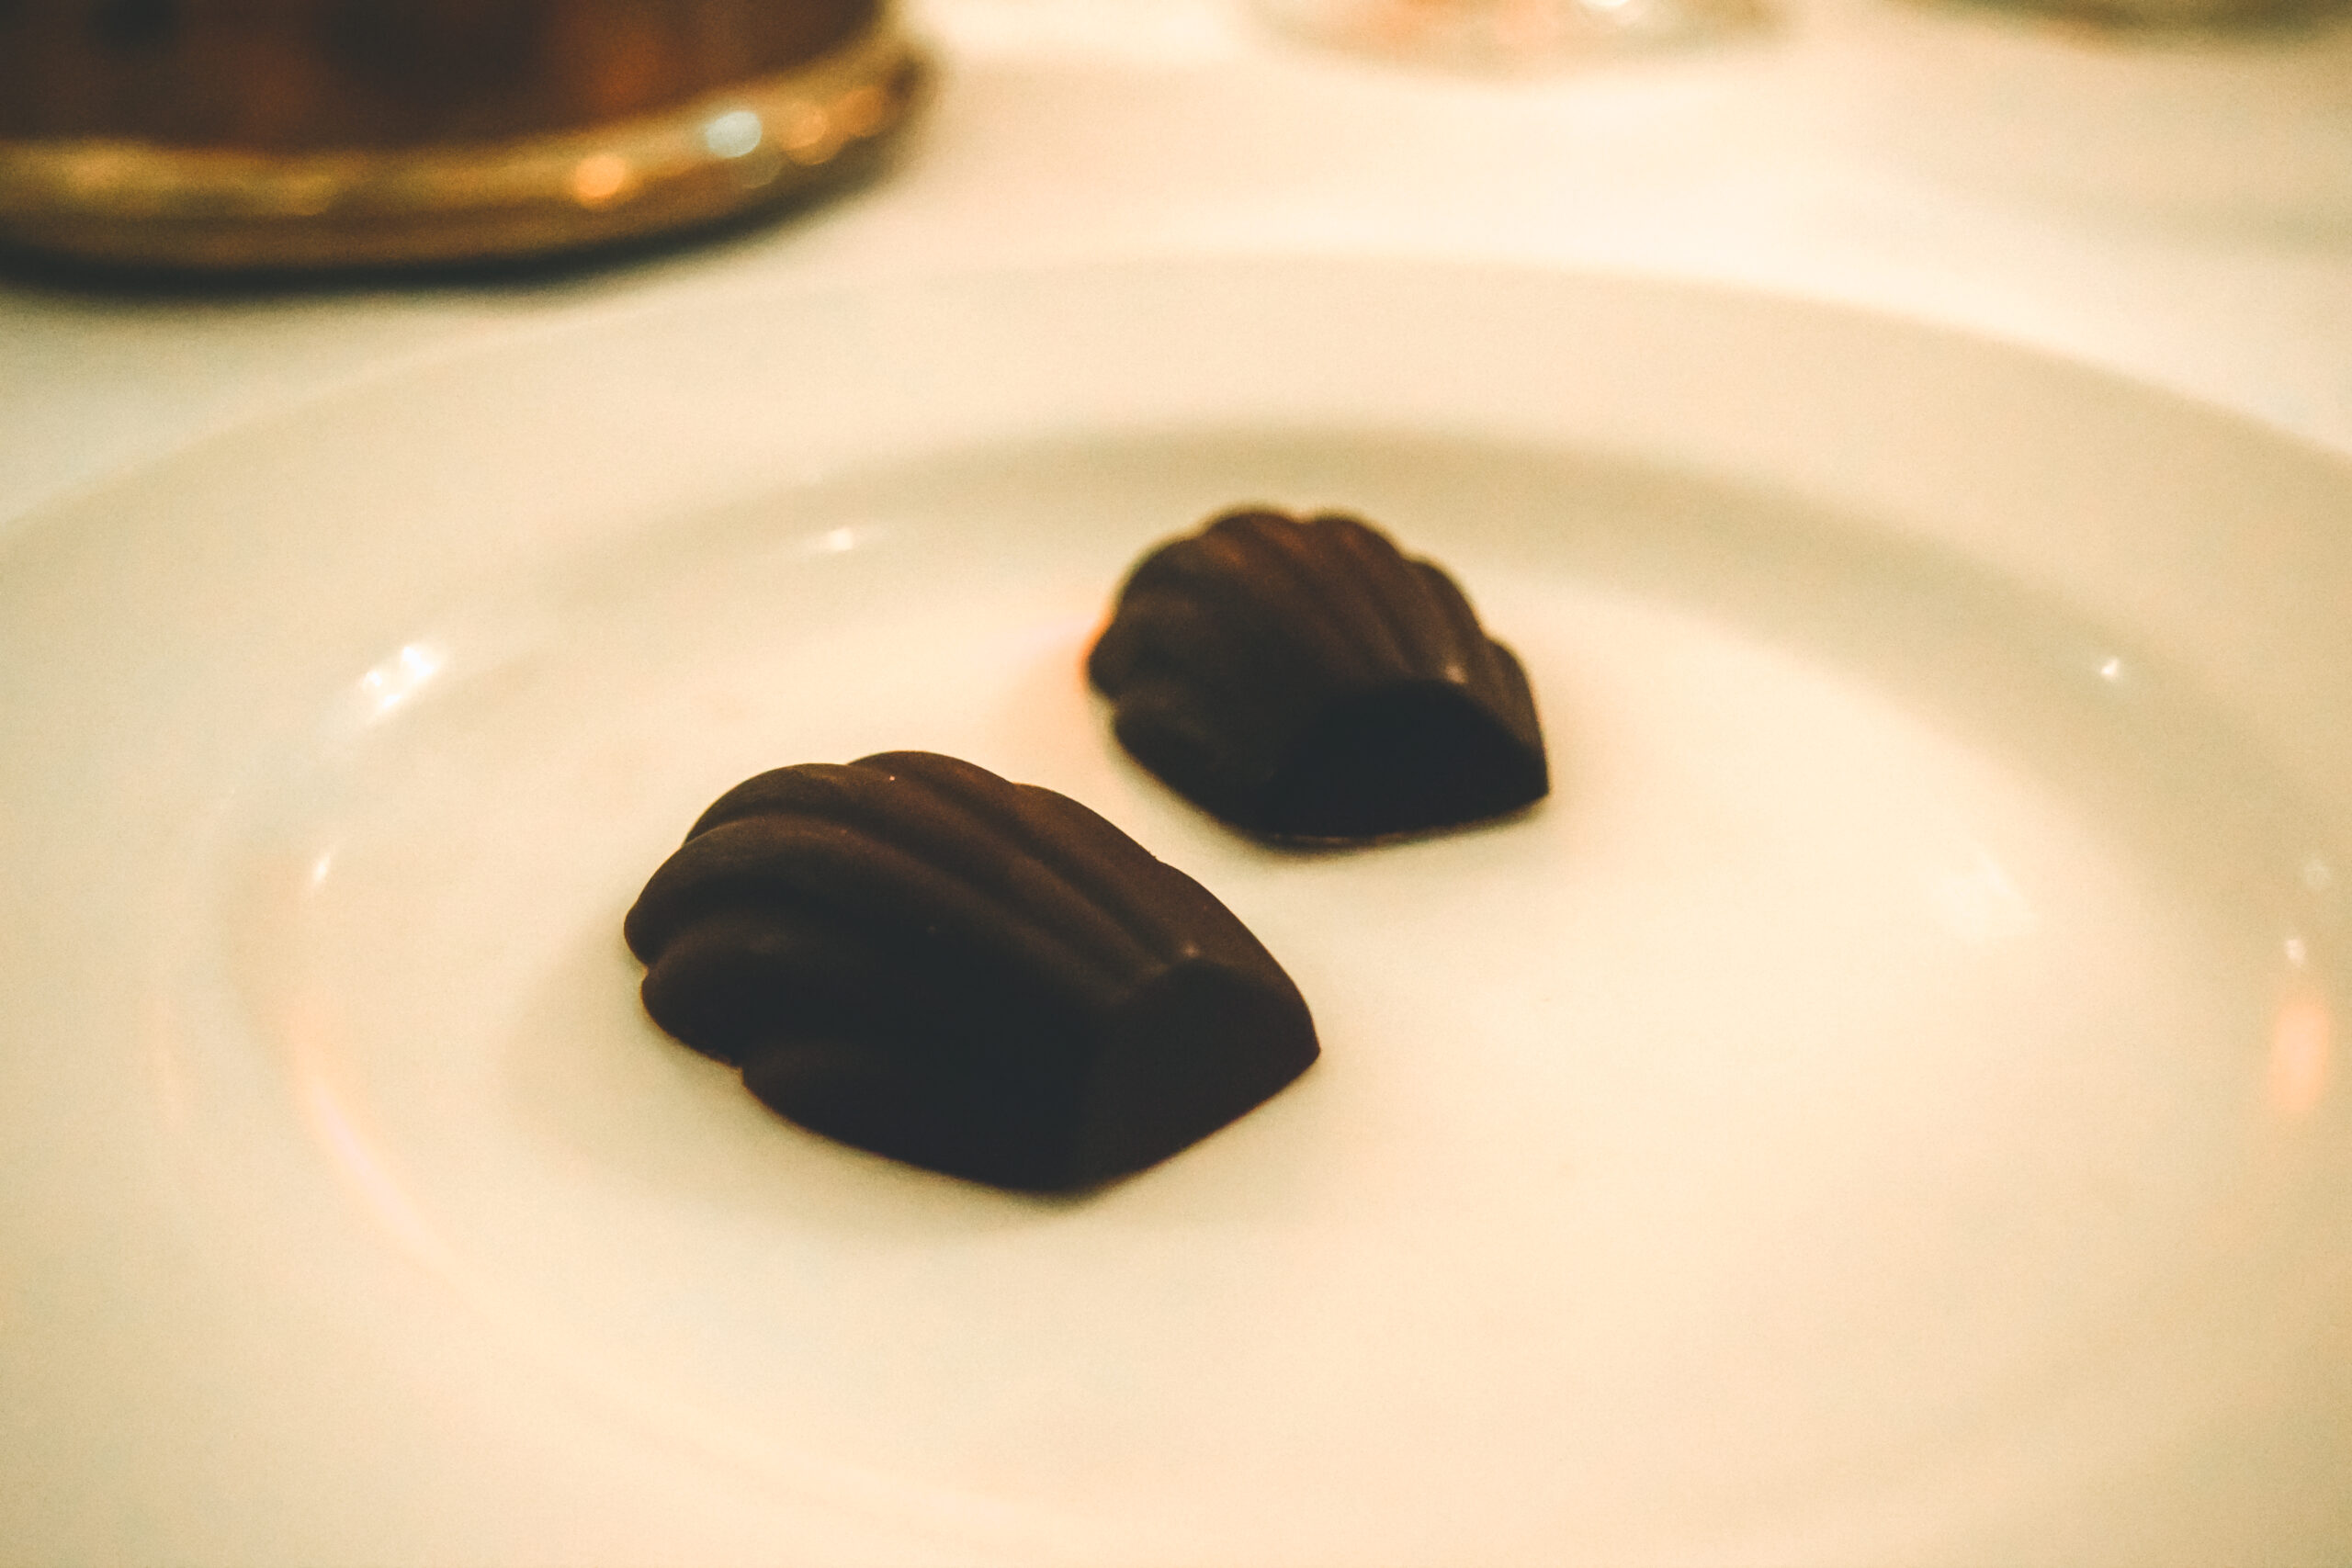 DESSERT: HOMEMADE DARK CHOCOLATE Otto's French Restaurant_Best old school french restaurant in london_review_food critic_travel blog_gray's inn road_Travel guide to london uk blog what to do what to see where to go 3 days